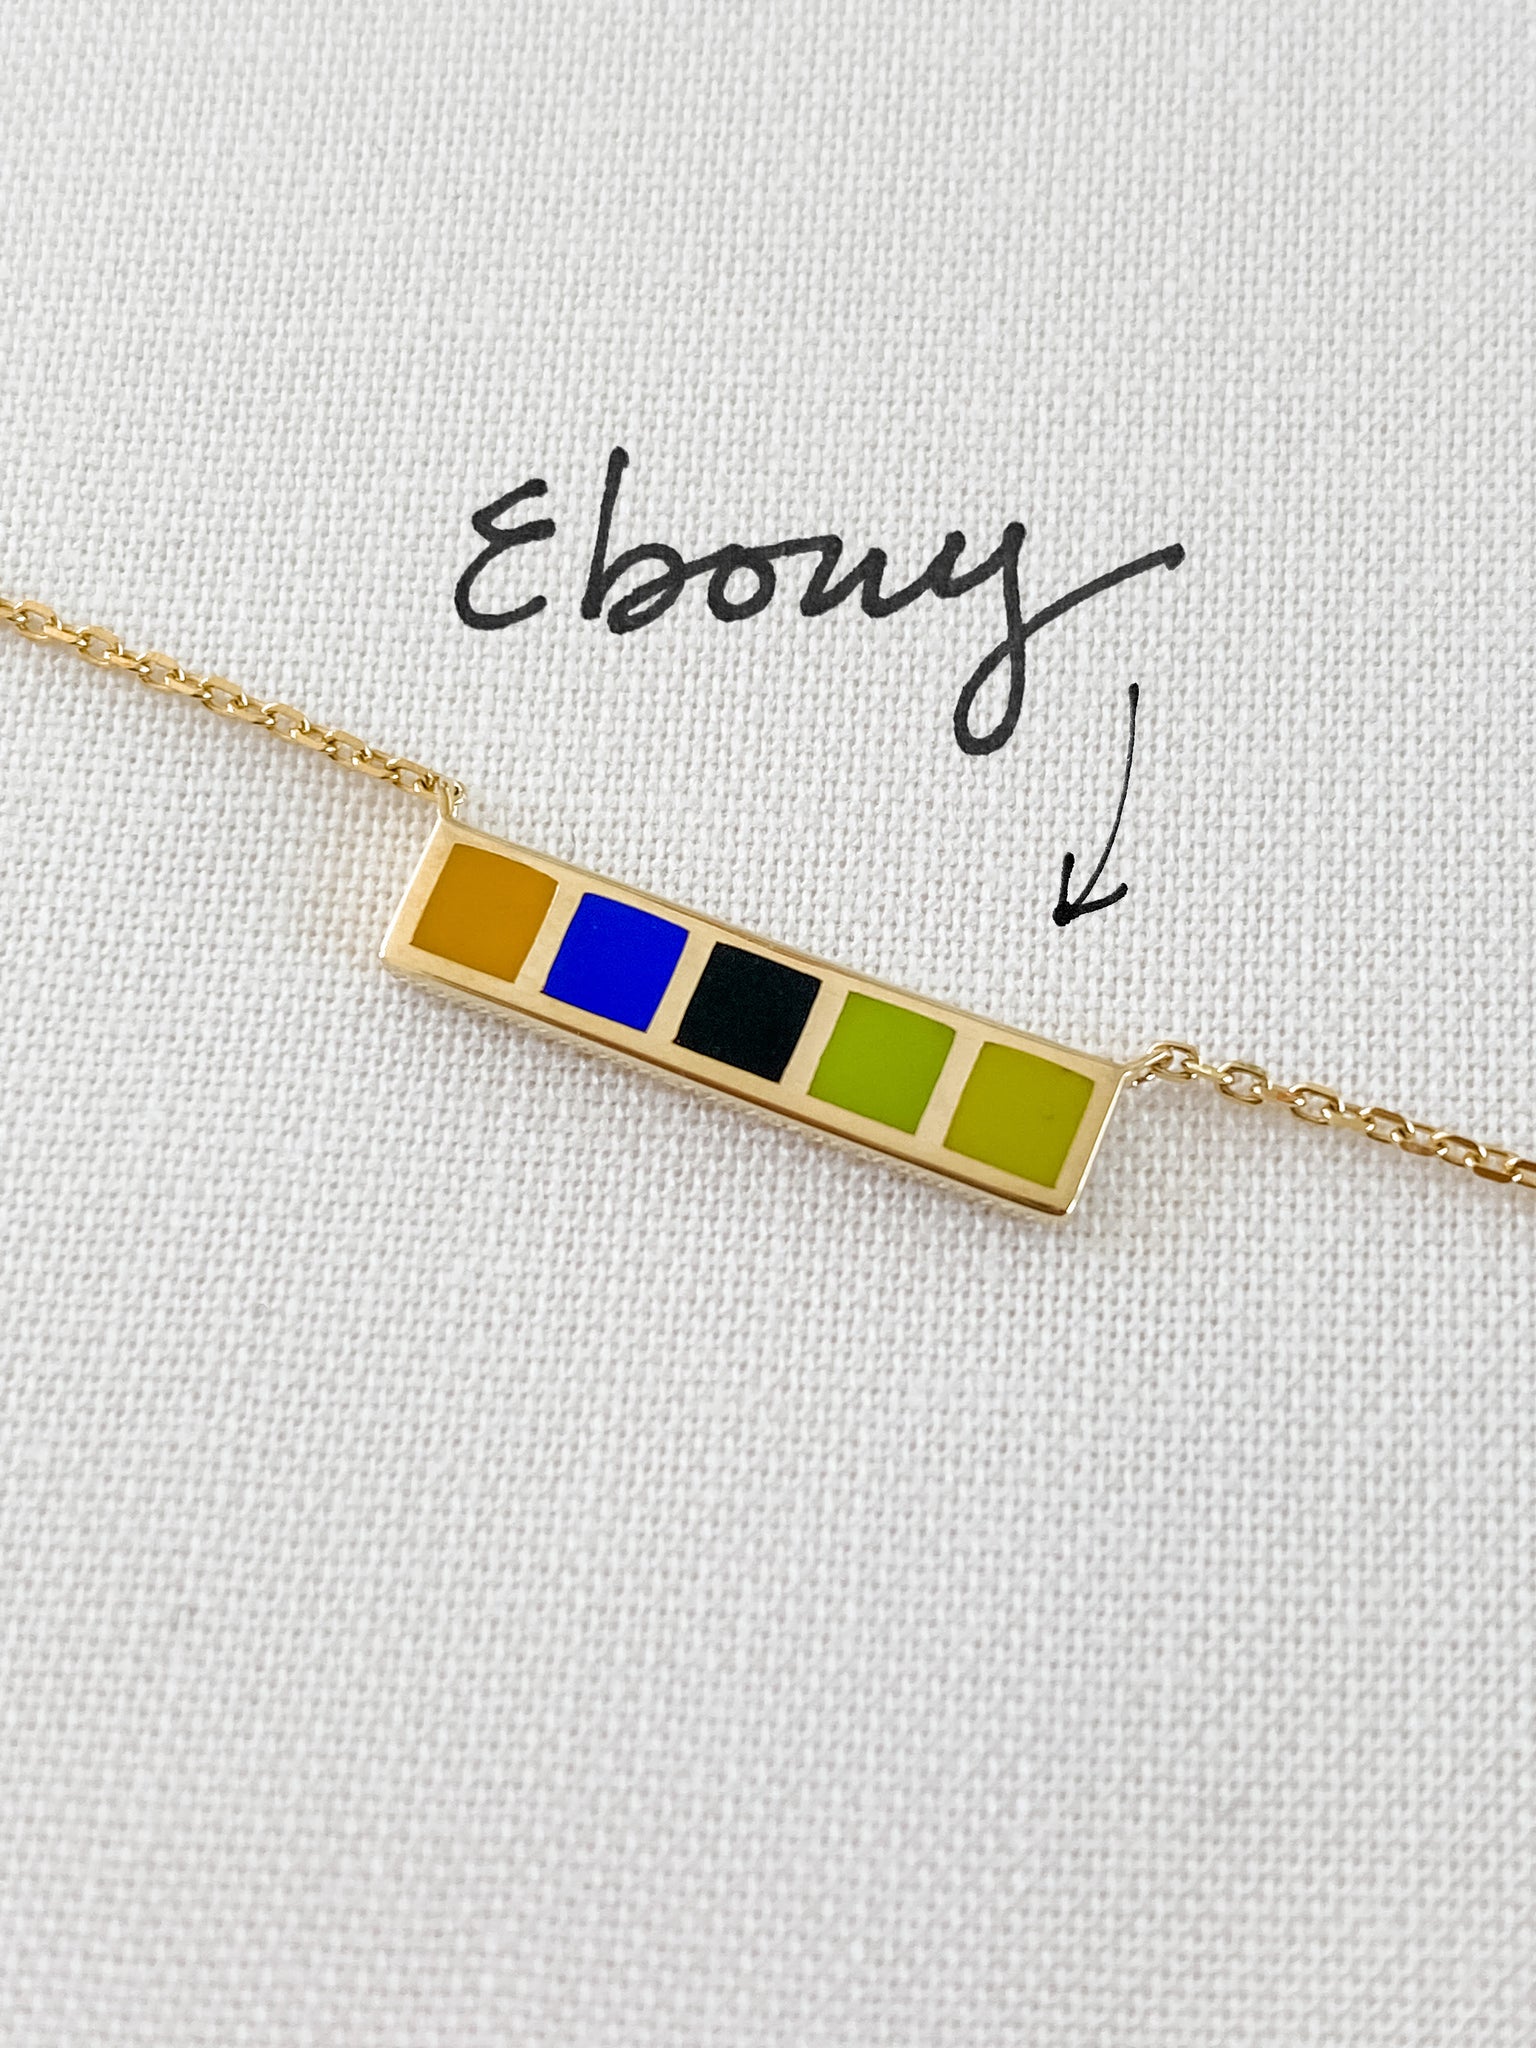 Ebony "in color" Synesthesia Necklace